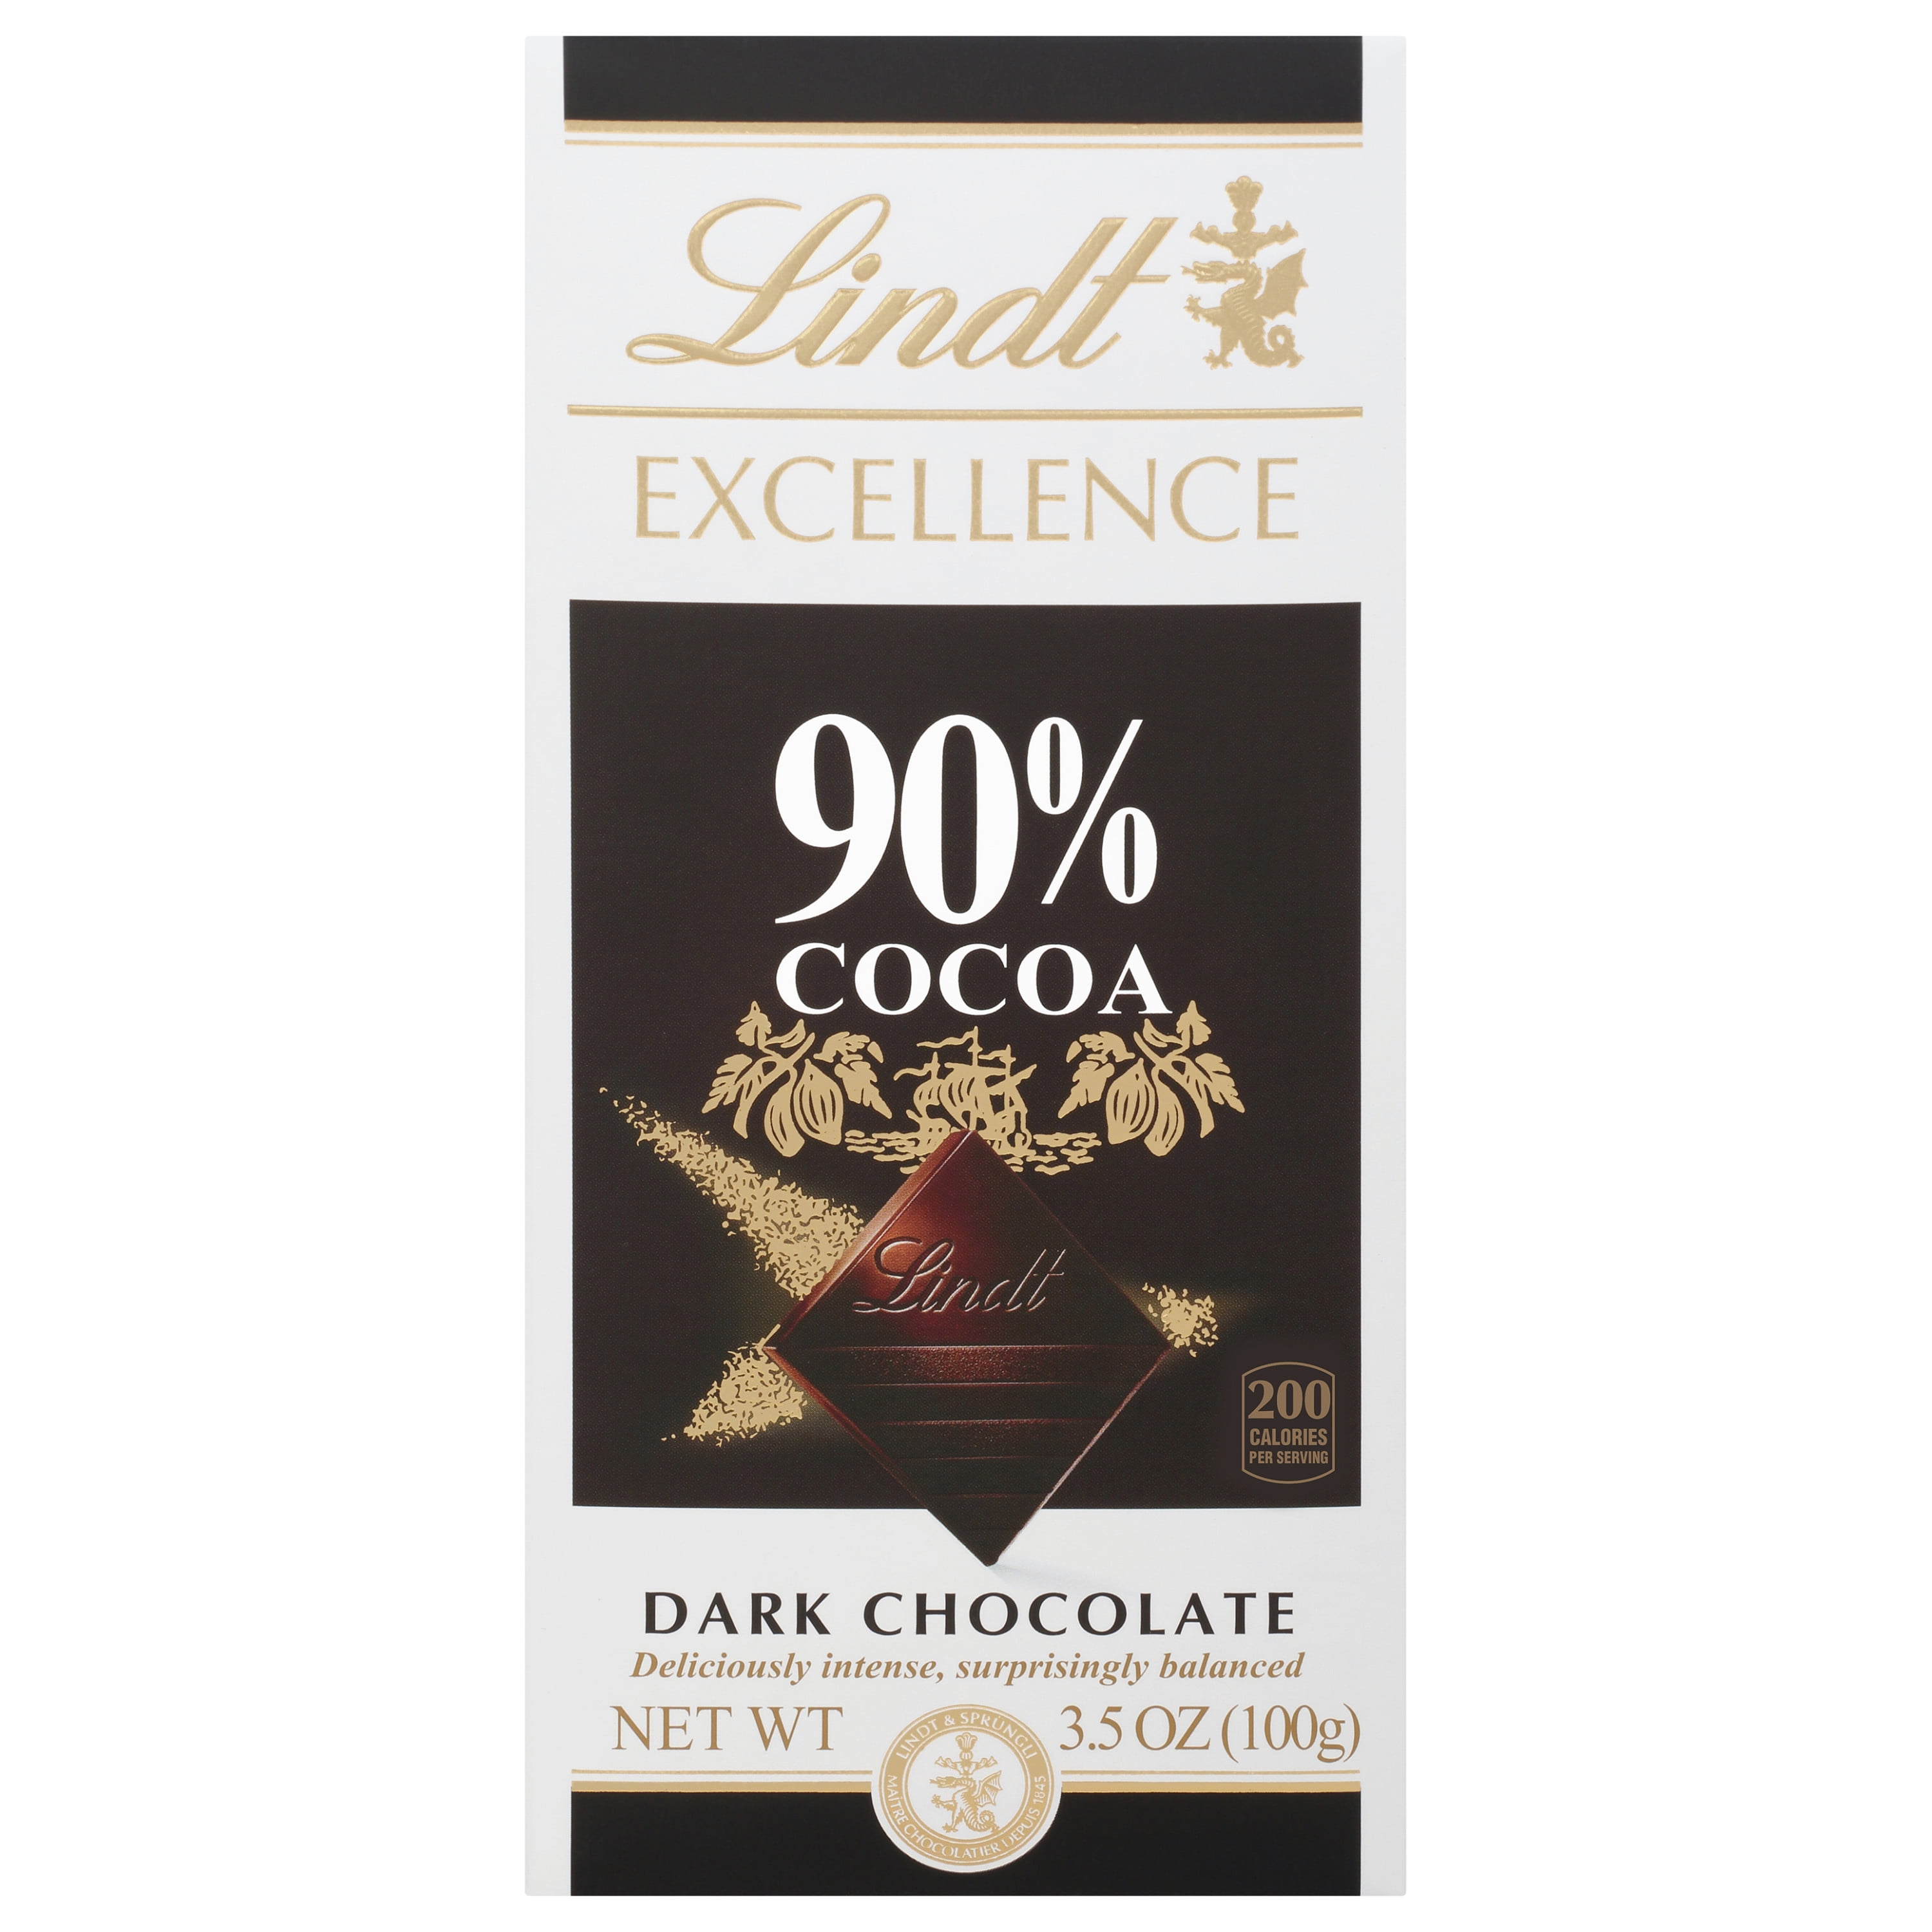 Lindt EXCELLENCE 90% Cocoa Dark Chocolate Bar, Easter Chocolate Candy, 3.5 oz.